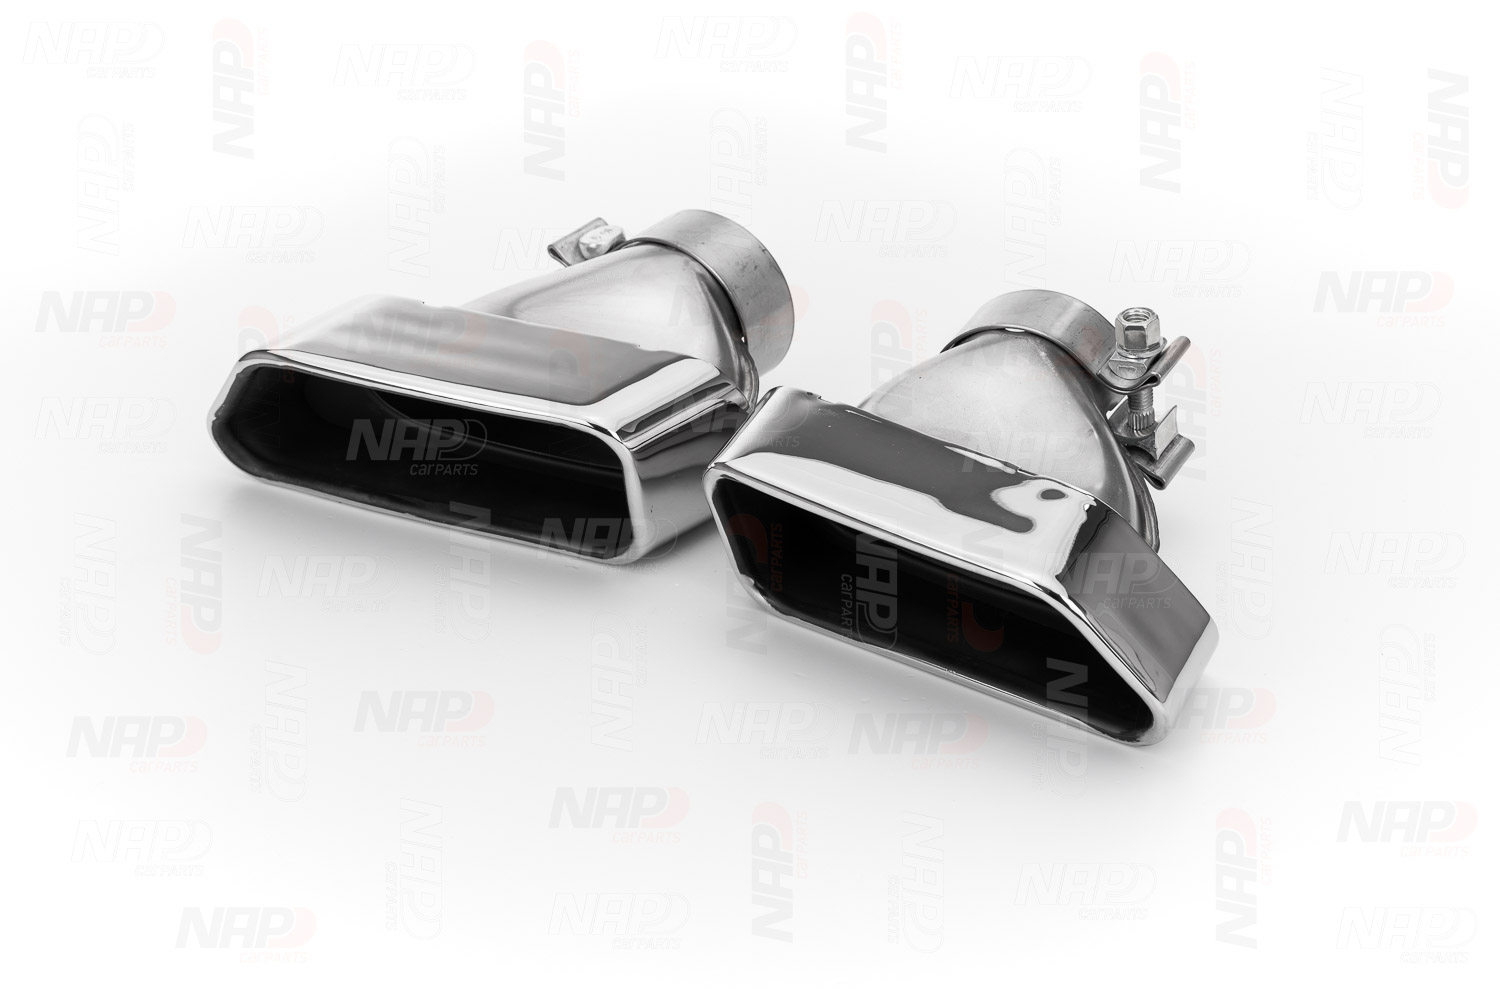 Original CER10004 NAP carparts Performance exhaust experience and price